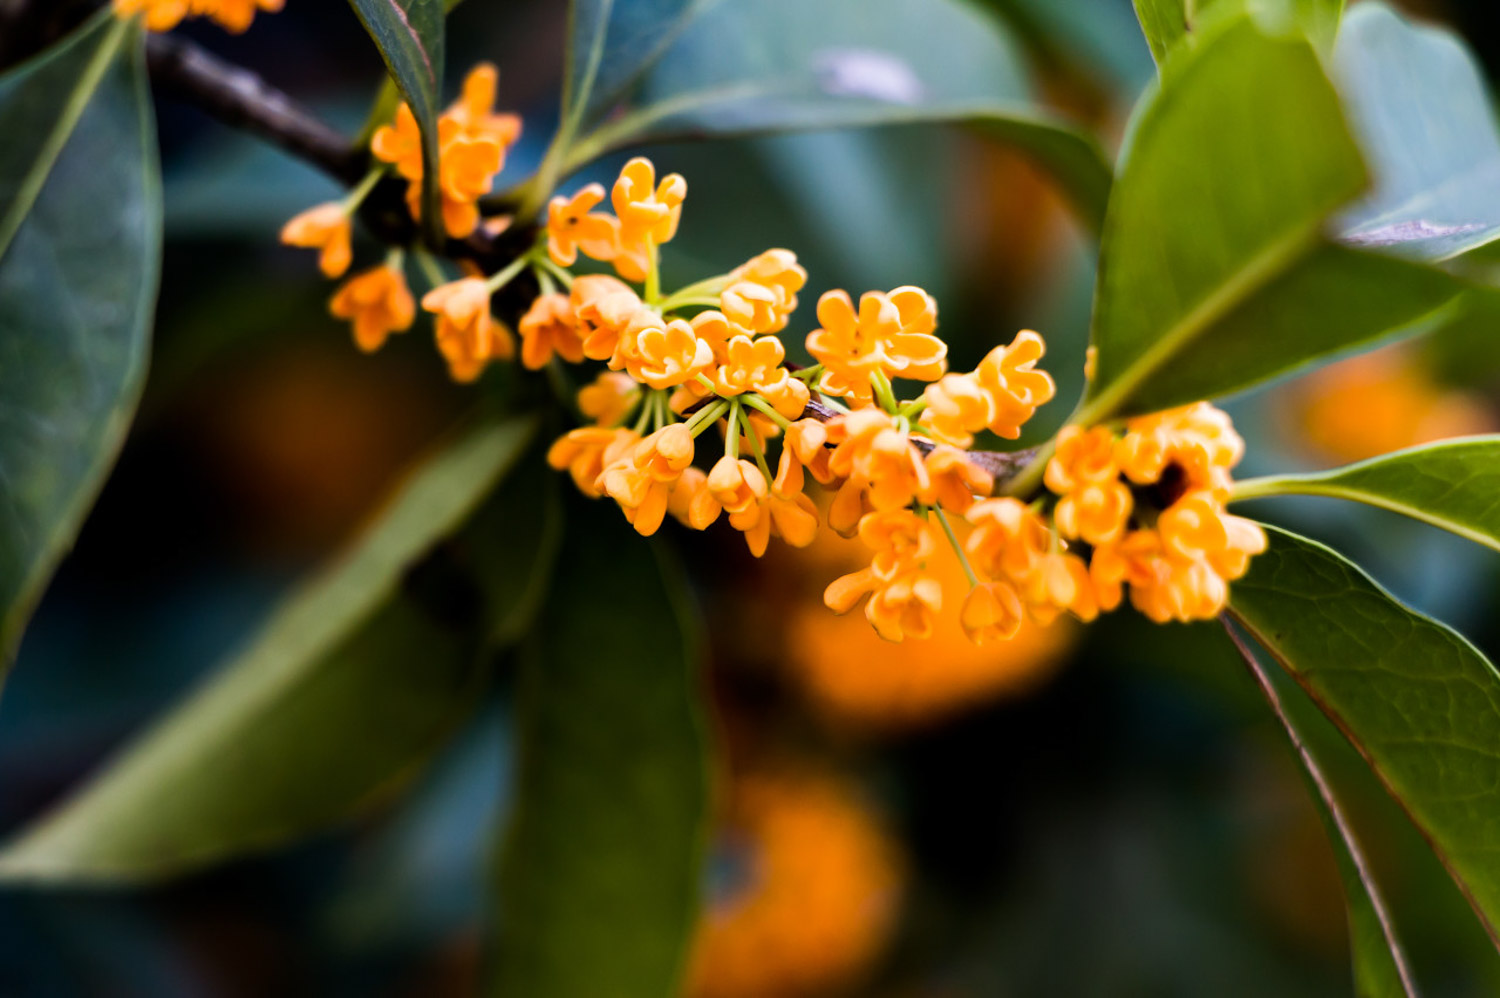 sweet-scented osmanthus